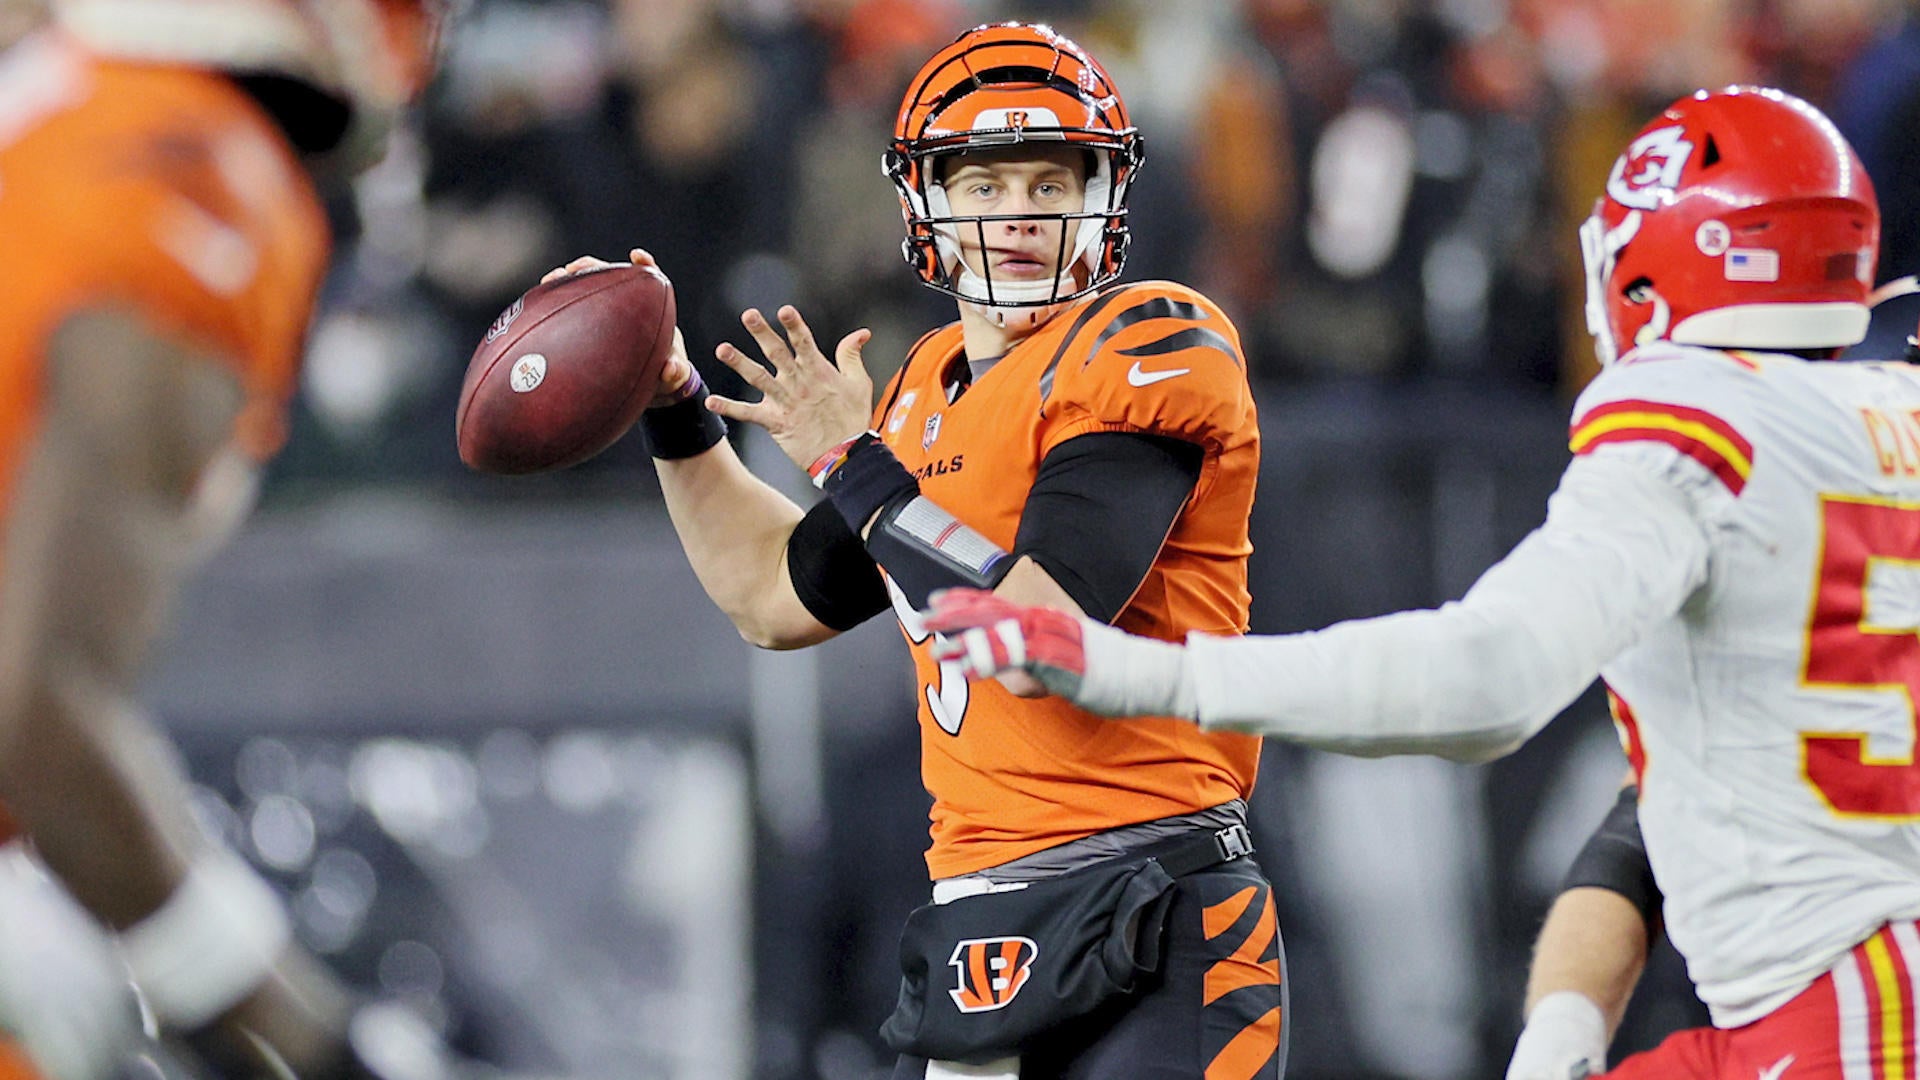 Bengals Take Down Chiefs in Overtime Battle - ESPN 98.1 FM - 850 AM WRUF